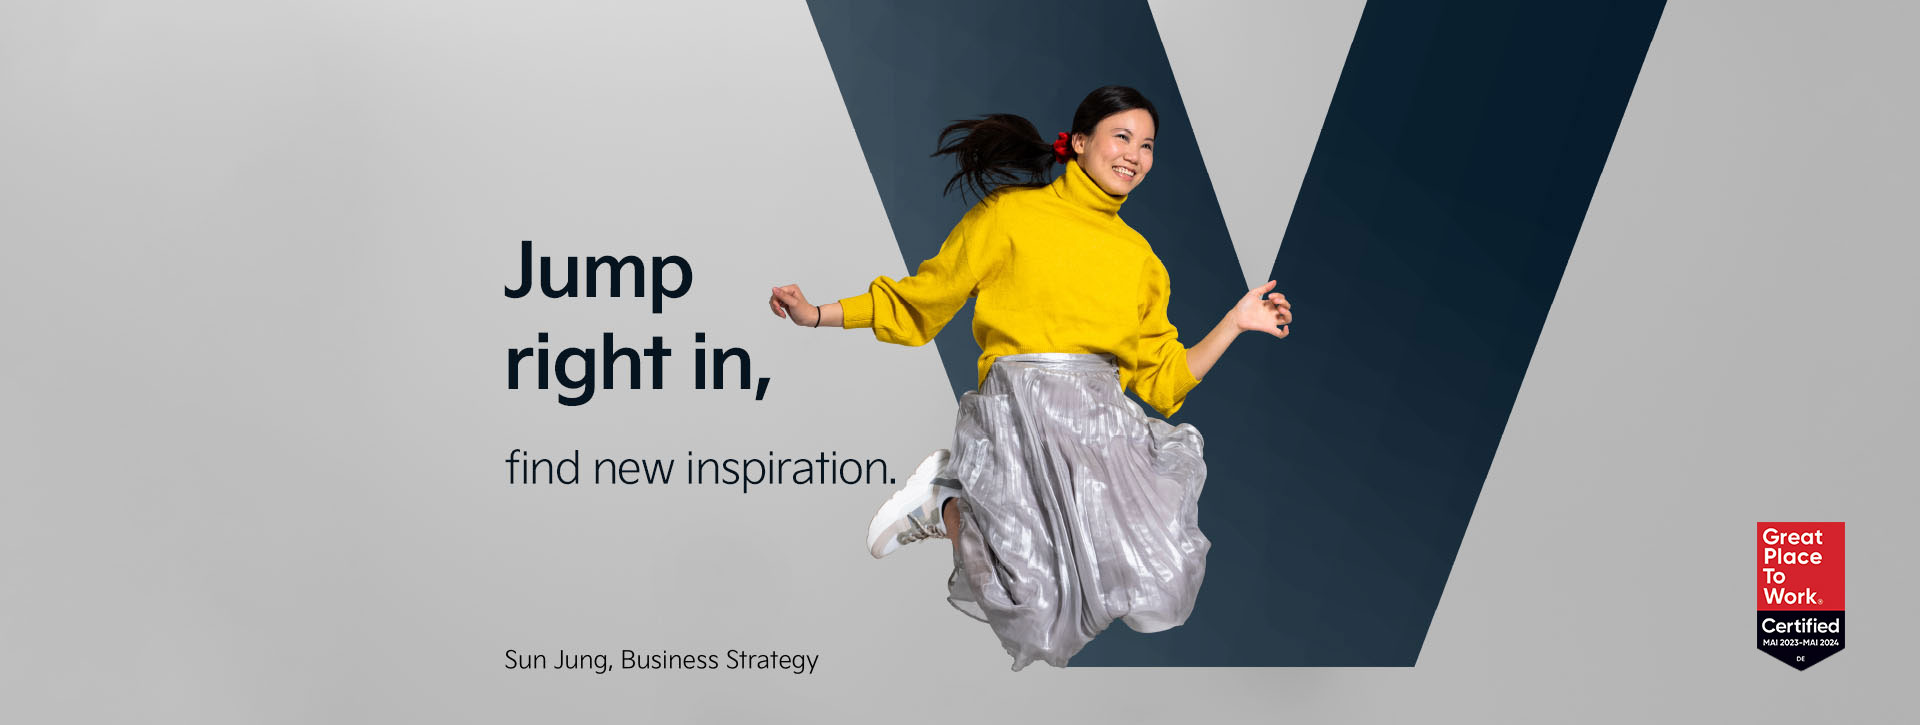 Sun from our Business Strategy department is jumping and smiling in front of the letter "V". Next to her we find our statement: "Jump right in - find new inspiration".